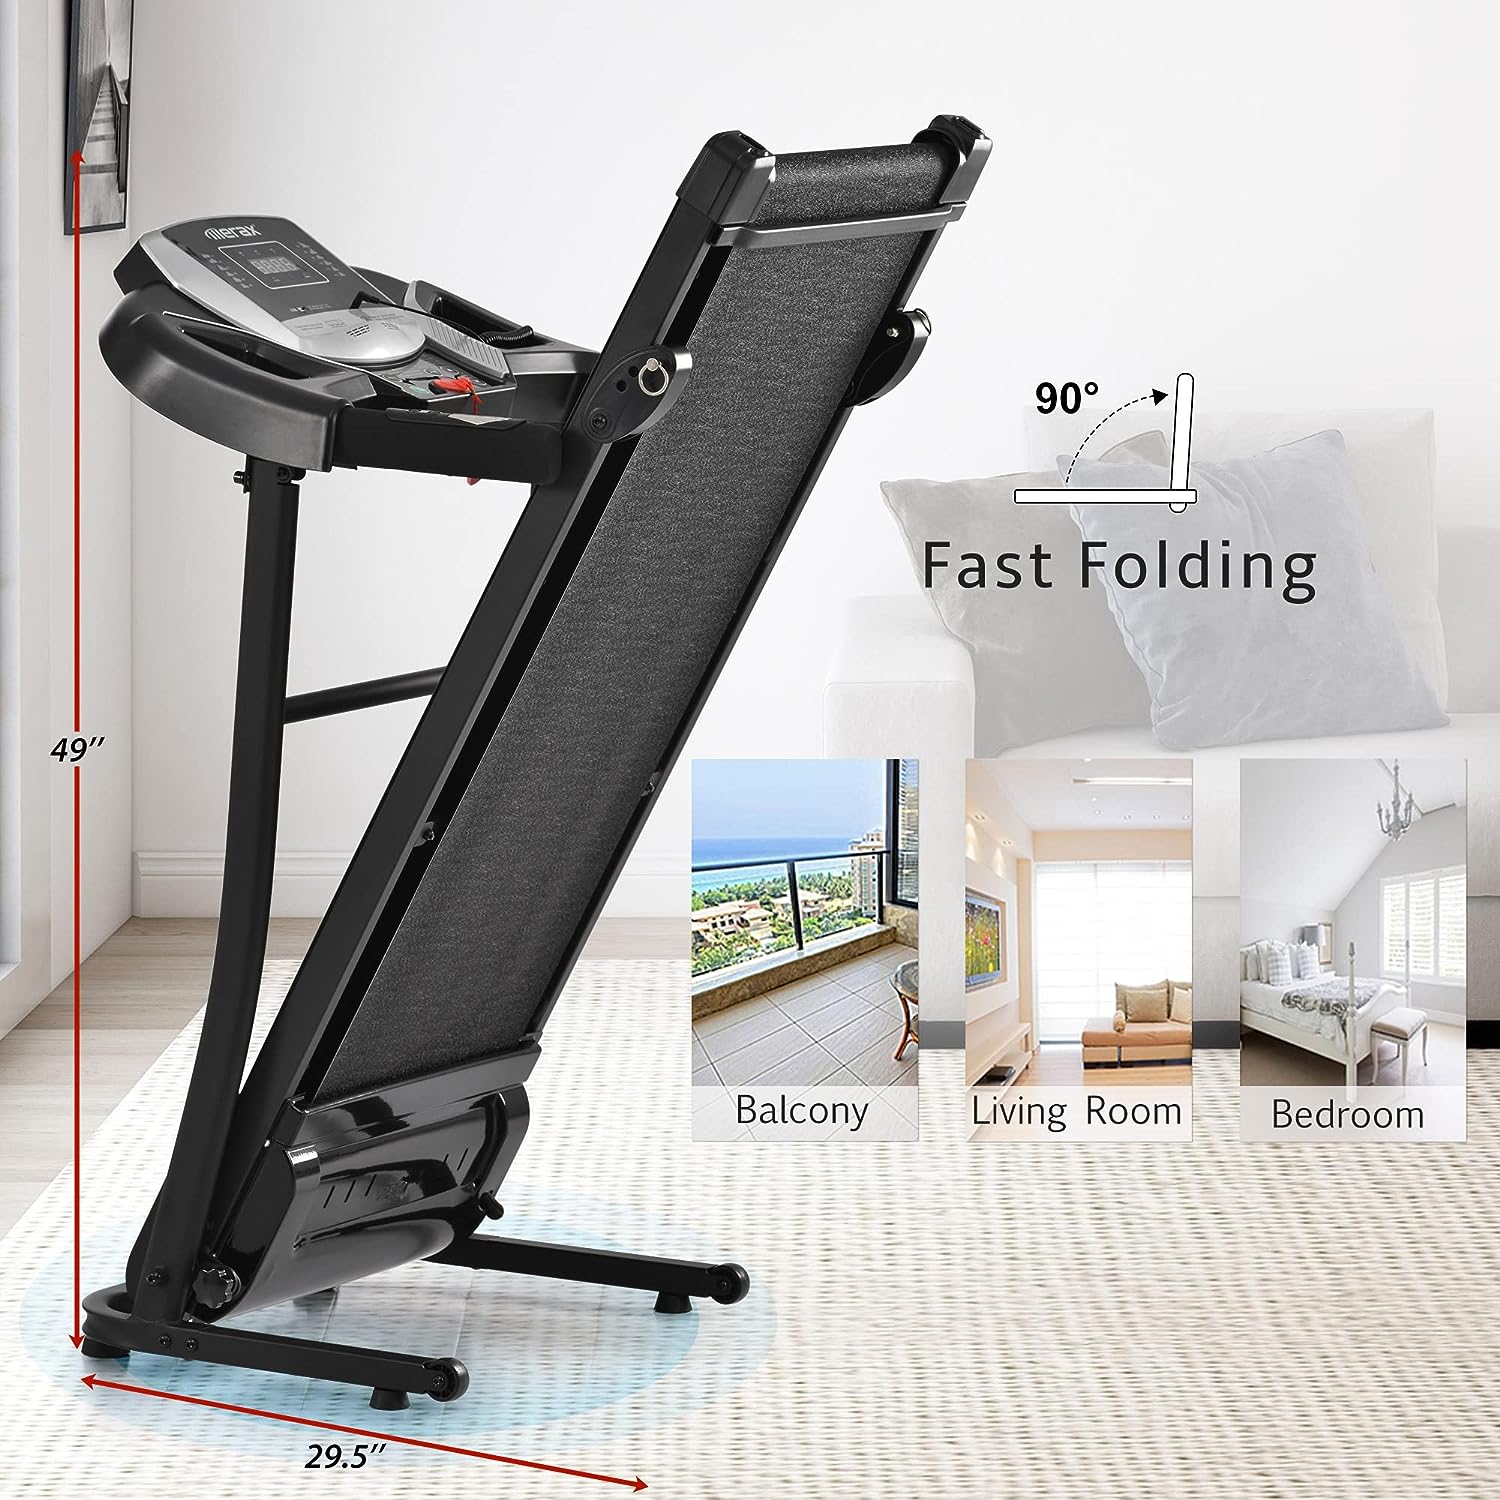 Merax Electric Folding Treadmill – Easy Assembly Fitness Motorized Running Jogging Machine with Speakers for Home Use, 12 Preset Programs